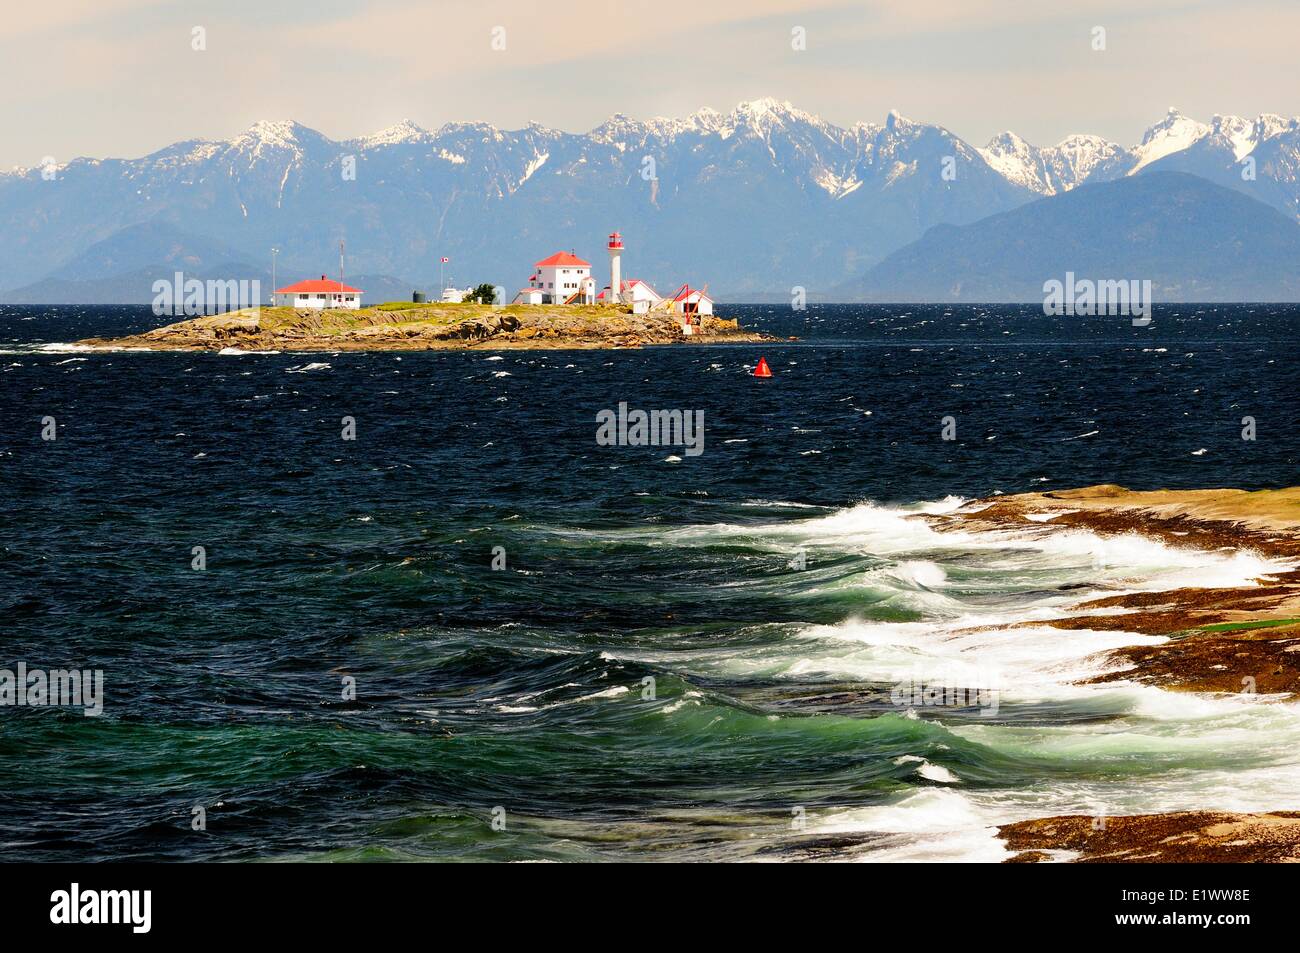 Entrance Island Lighthouse near Gabriola Island in the Strait Georgia near Nanaimo BC.  The mountains in the background are the Stock Photo